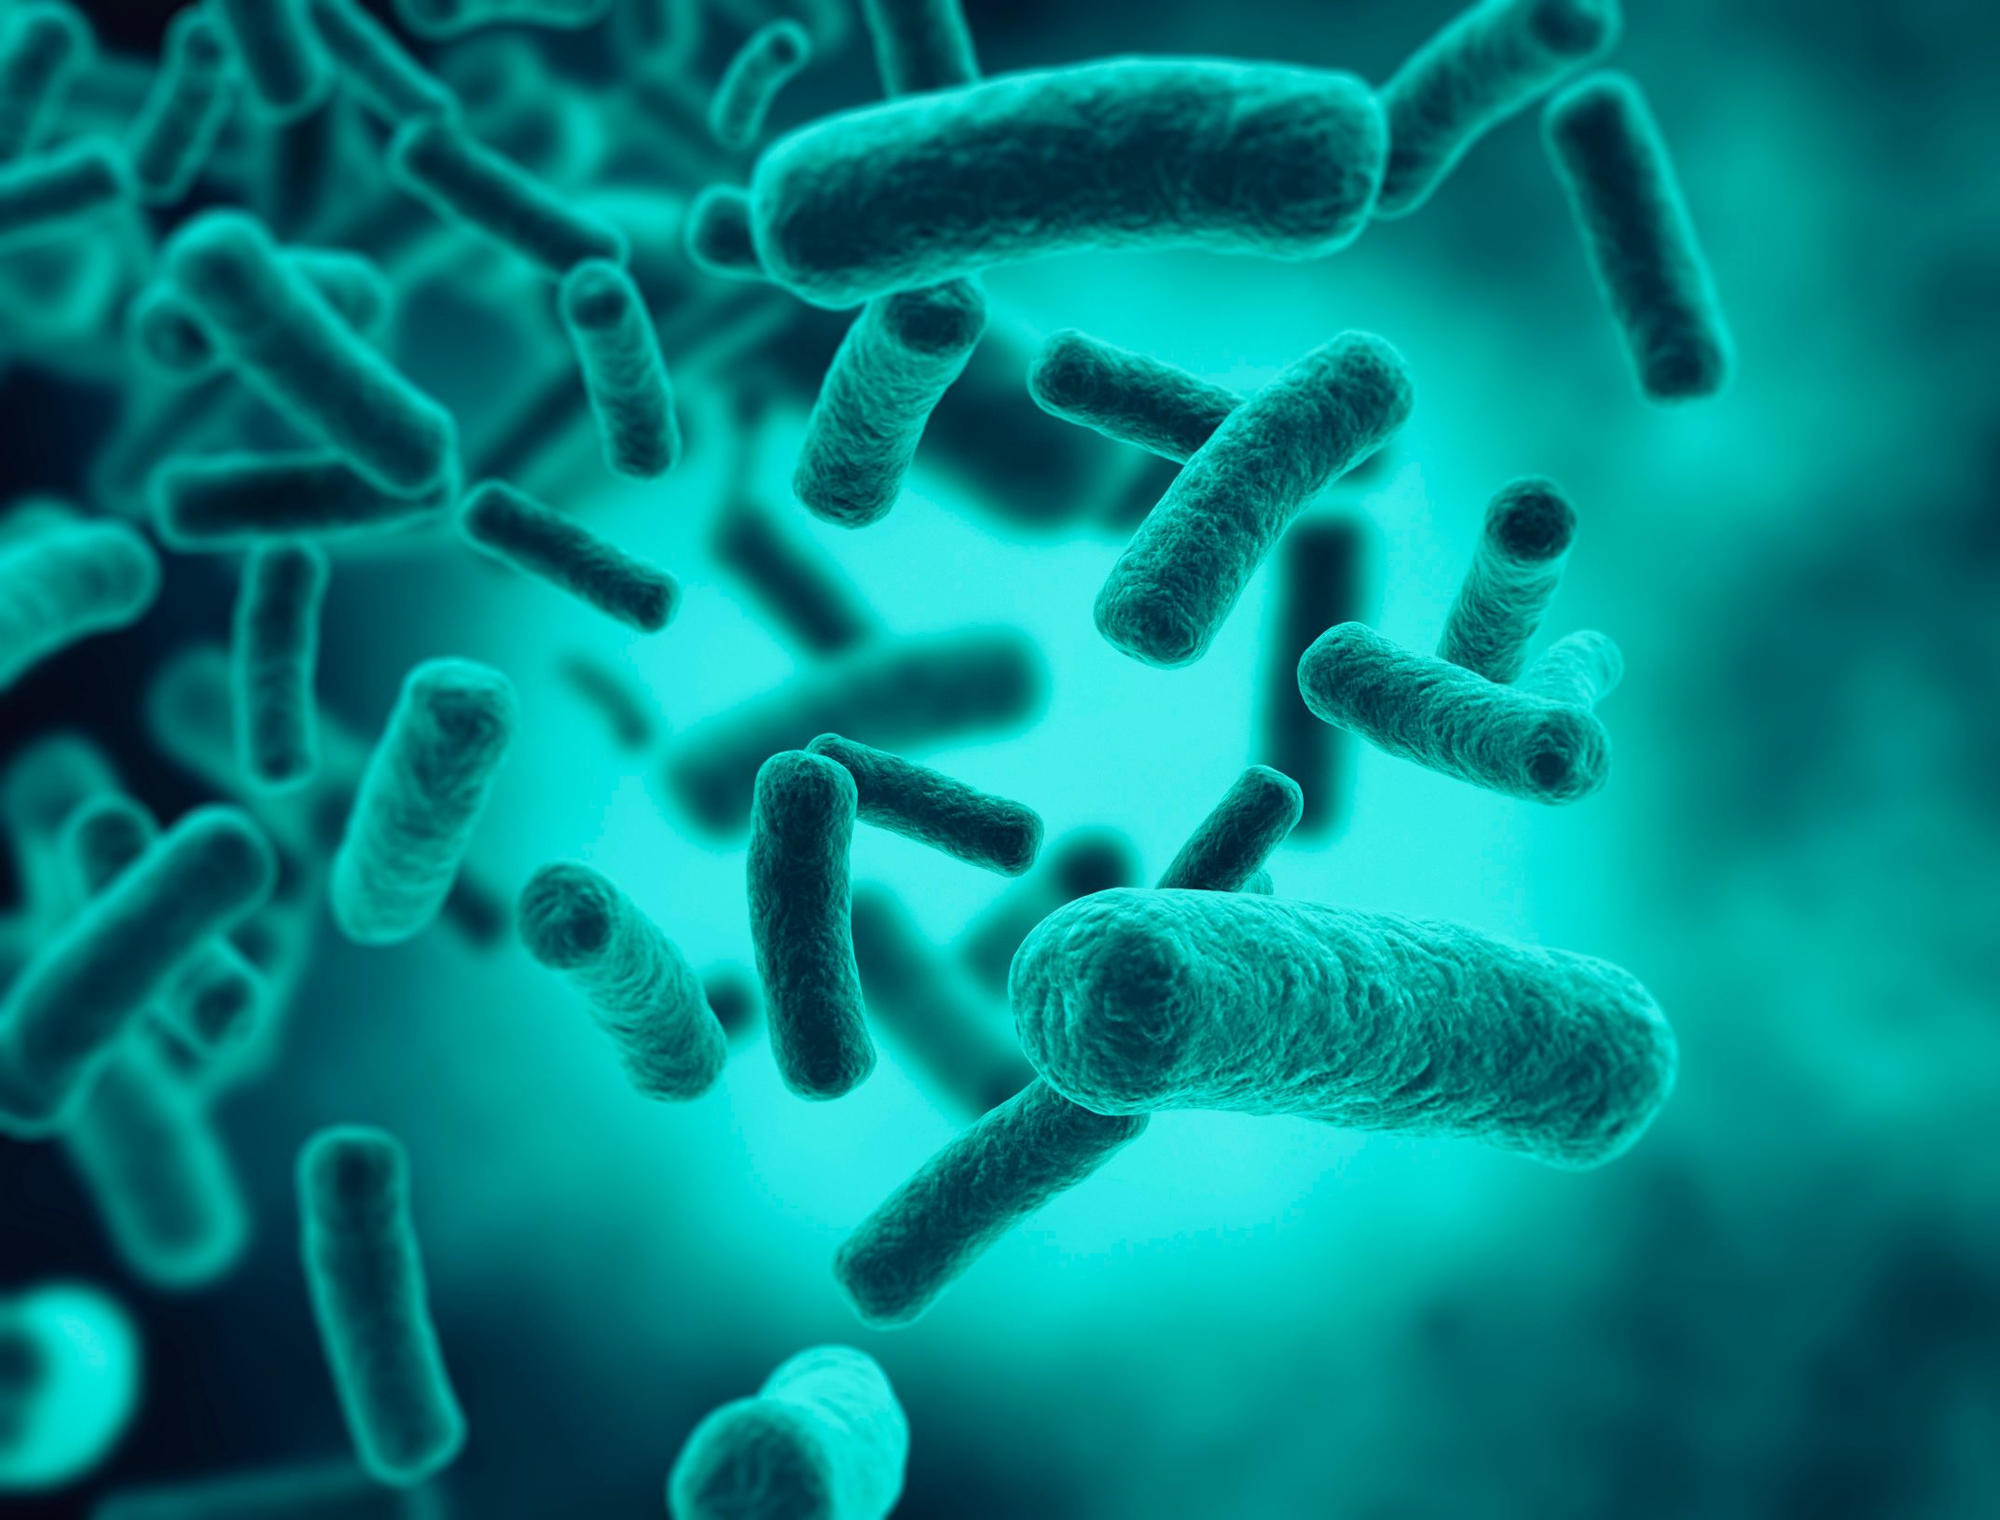 A study conducted by researchers from Florida Atlantic University and various international institutions has revealed that Vibrio bacteria, which can 